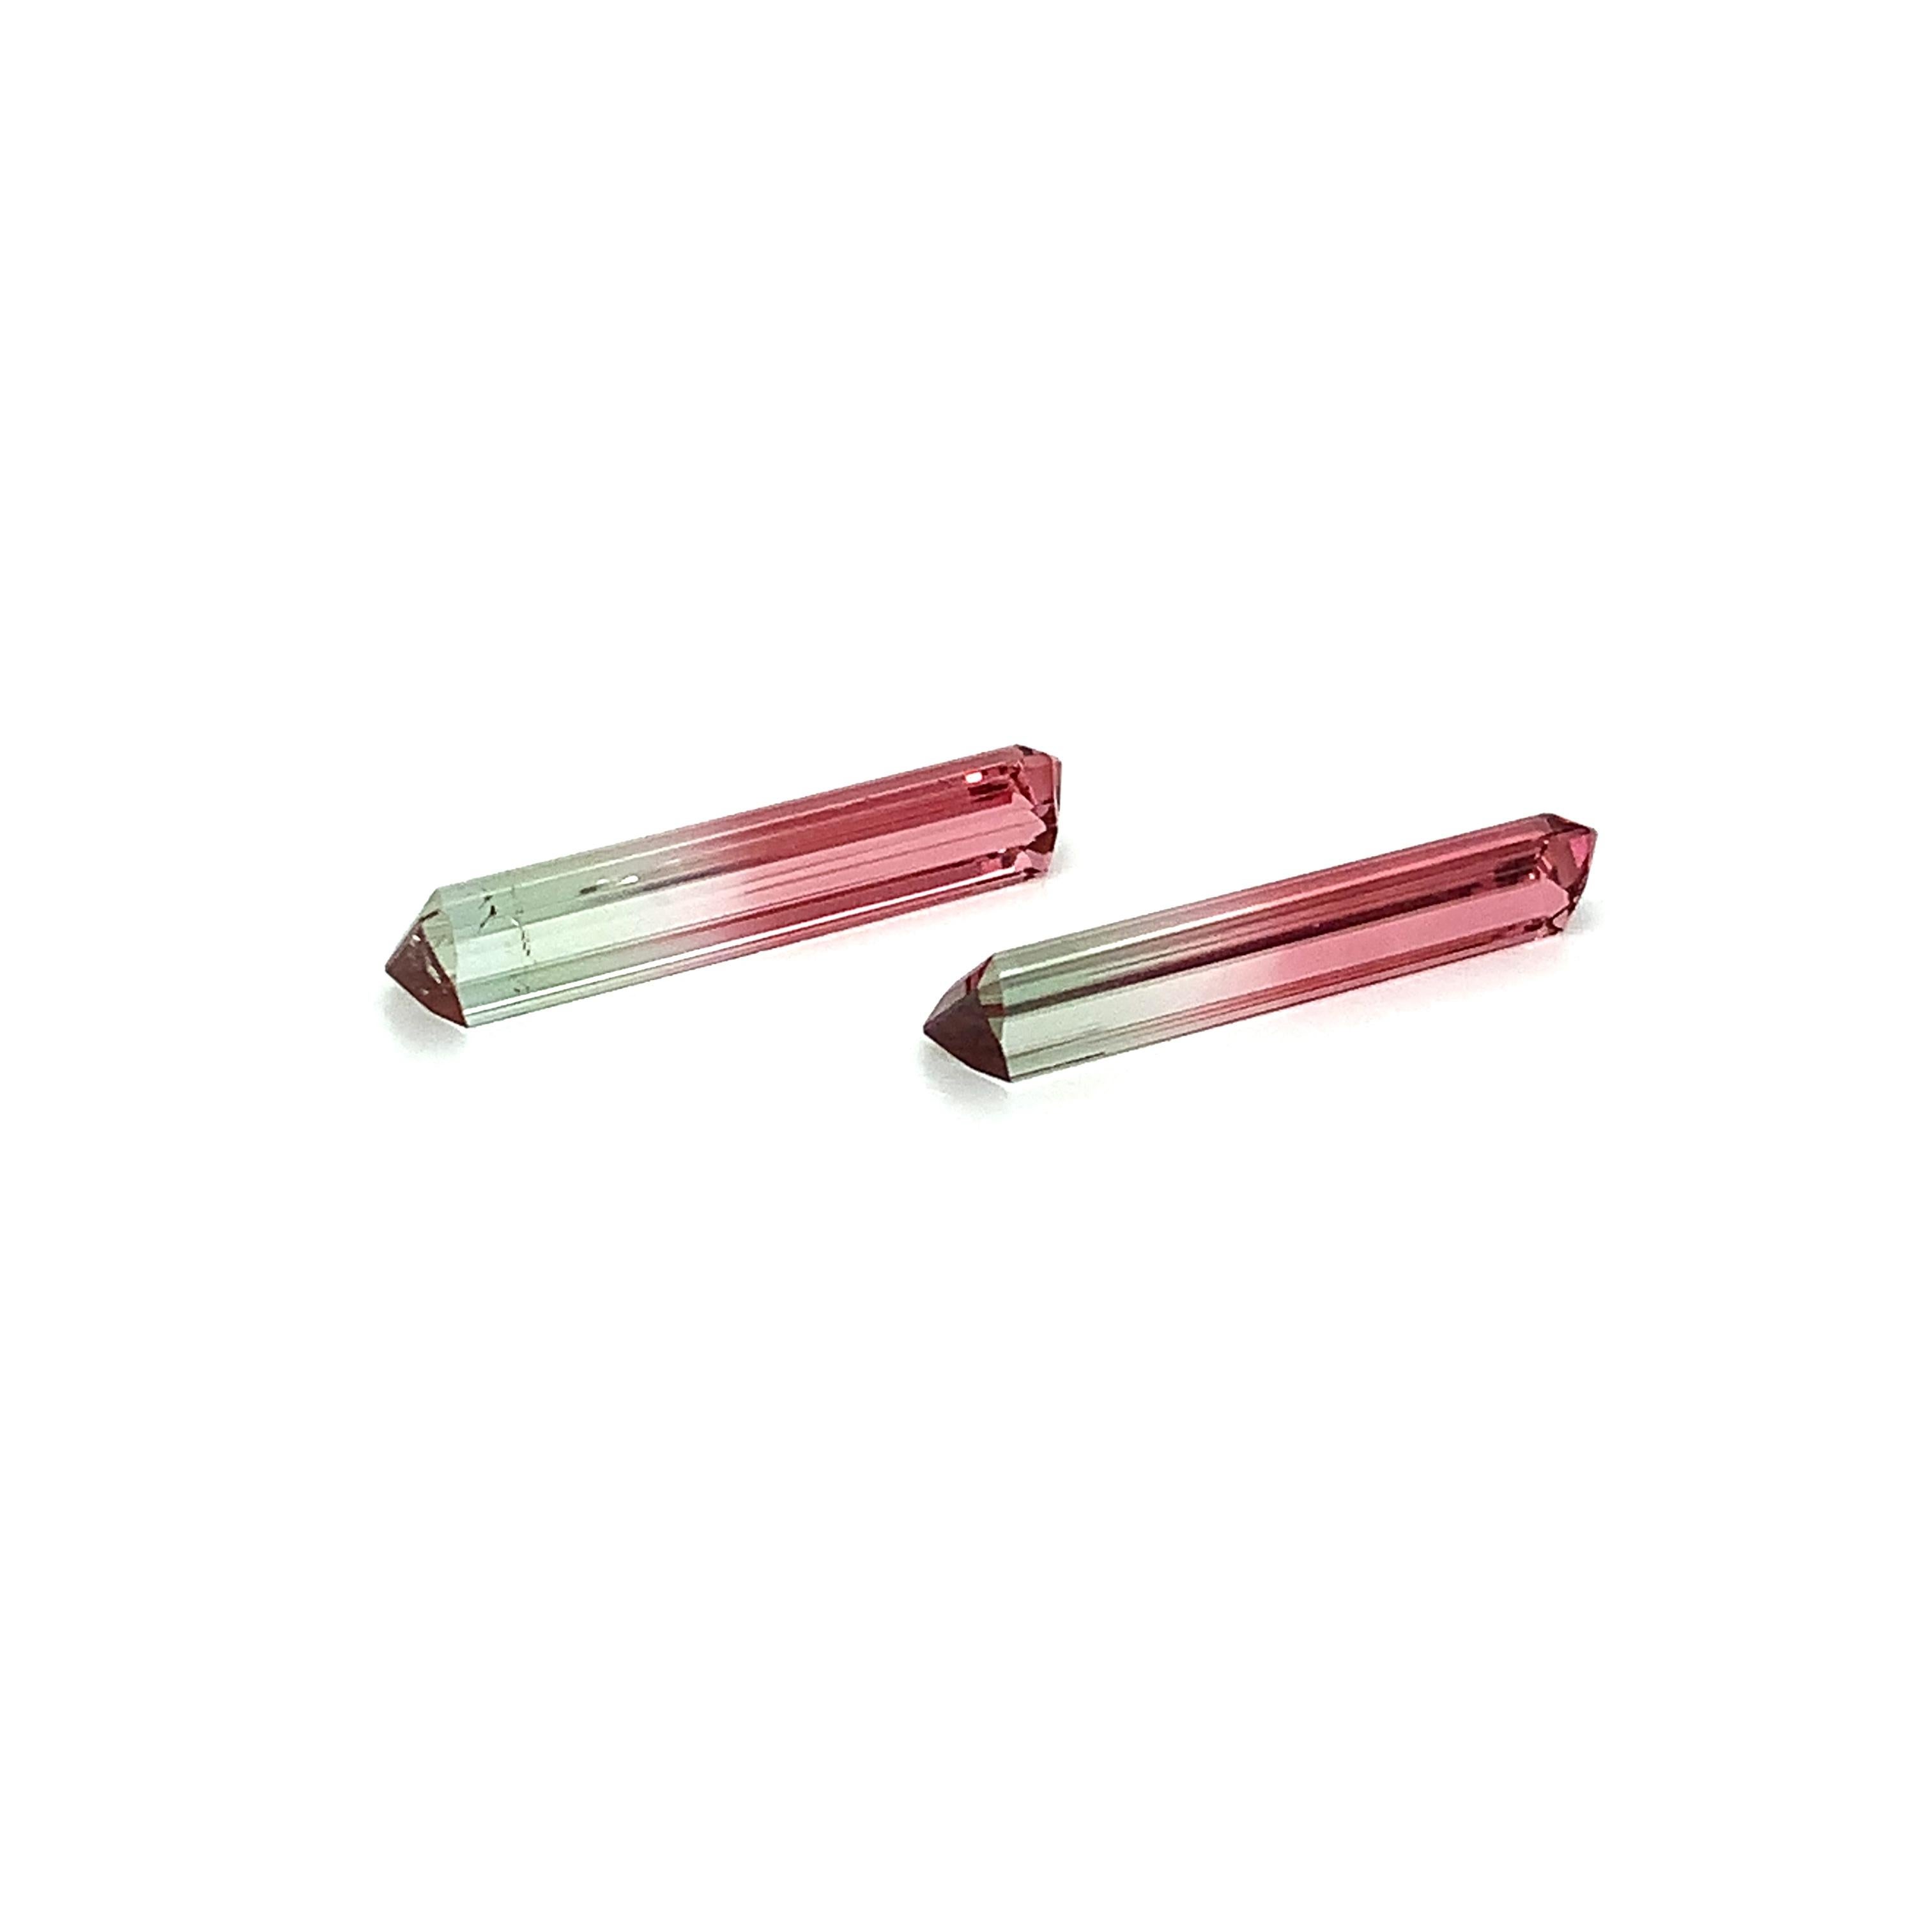 This beautiful matched pair of elongated bi-color tourmaline have a stunning division of classic watermelon tourmaline colors. Extremely brilliant, clean and full of life, these gems exhibit a lovely shade of green on one end, blending into a